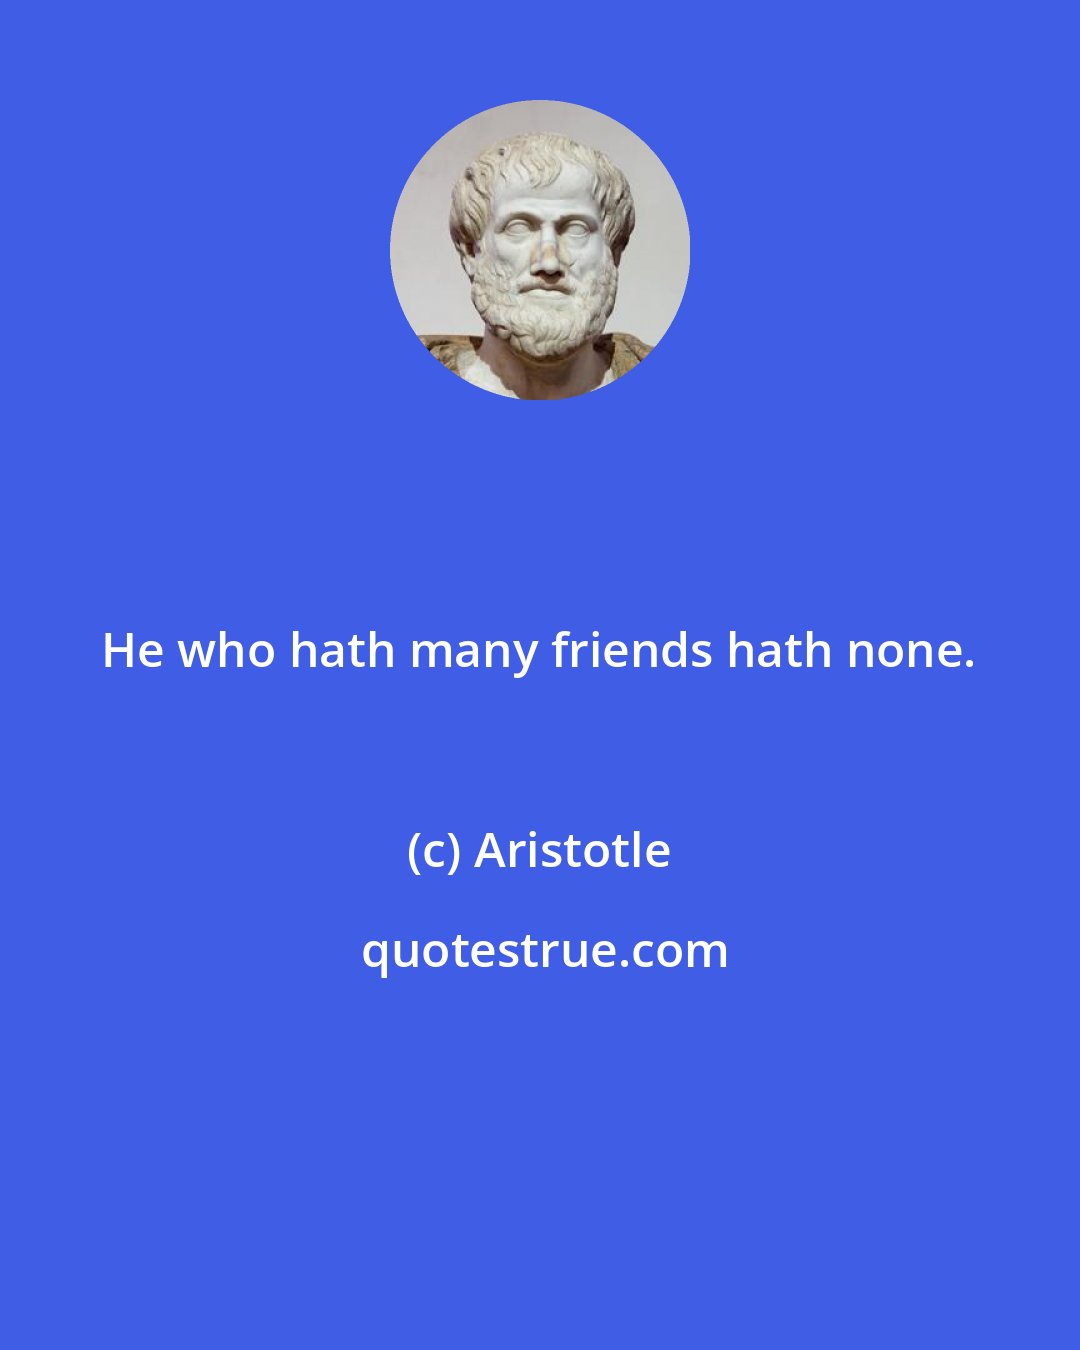 Aristotle: He who hath many friends hath none.